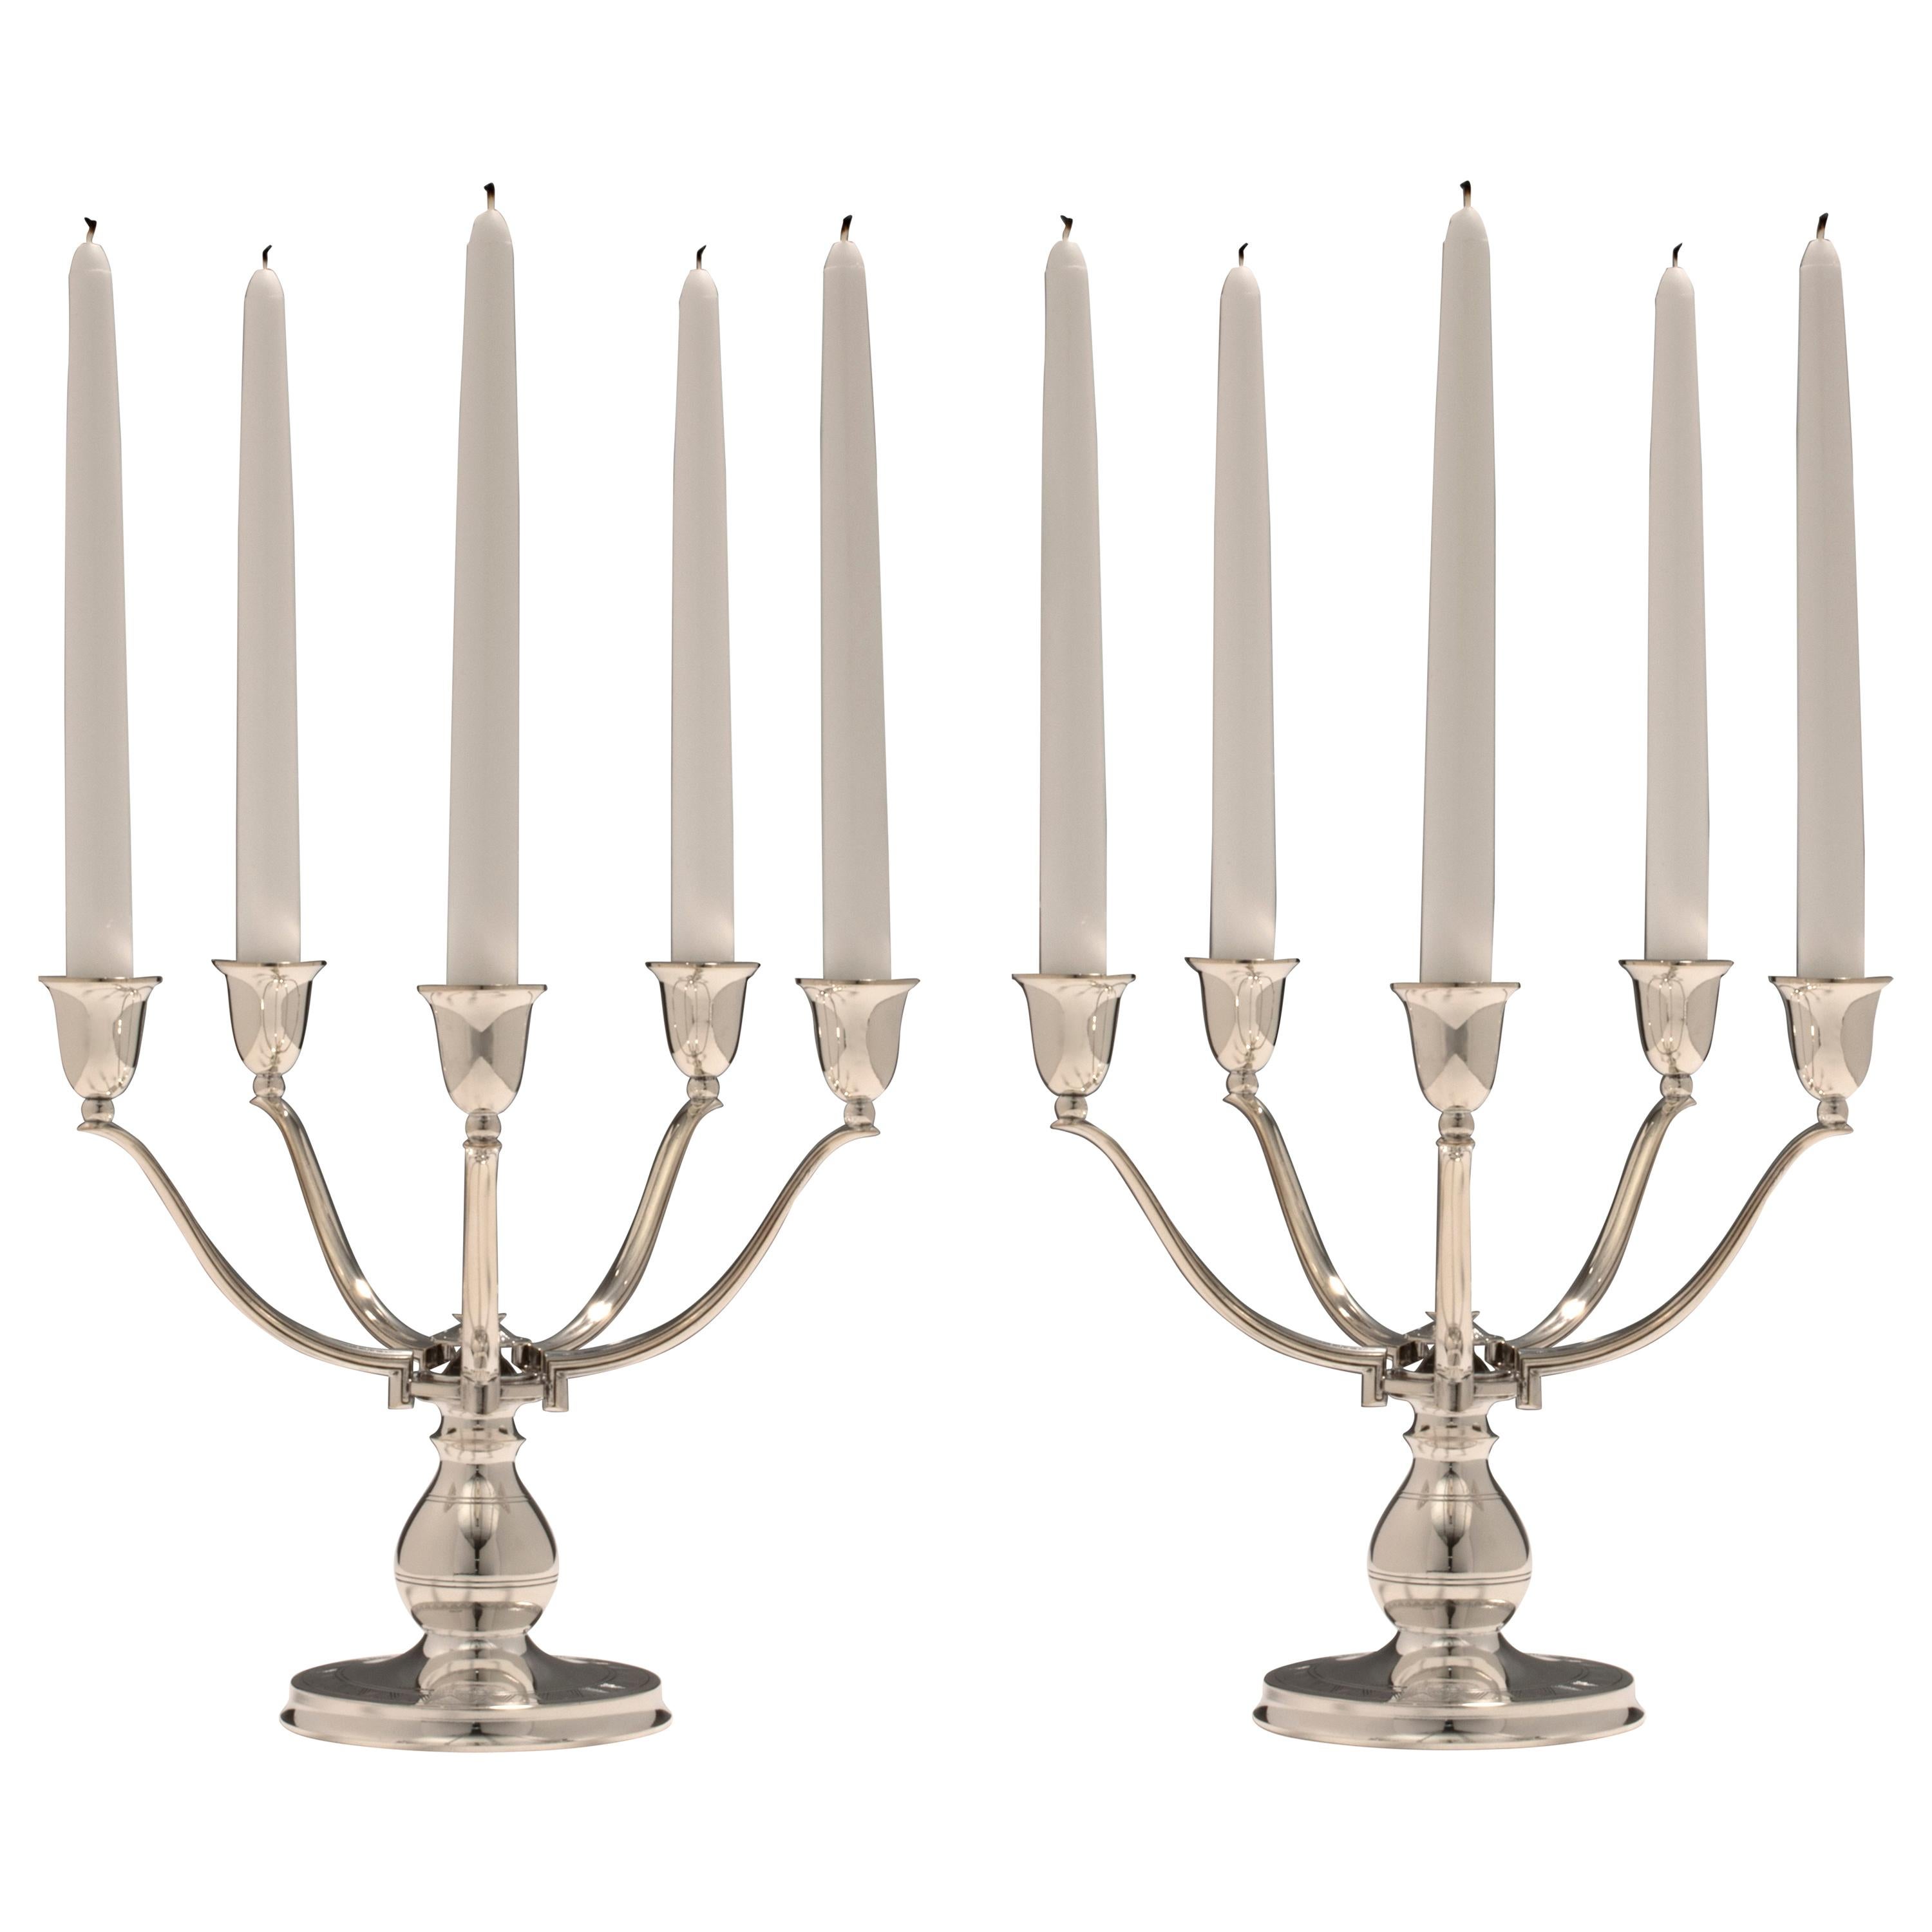 AS Solingen Germany Metal Candle Holders Art Deco Candlesticks Chrome ...